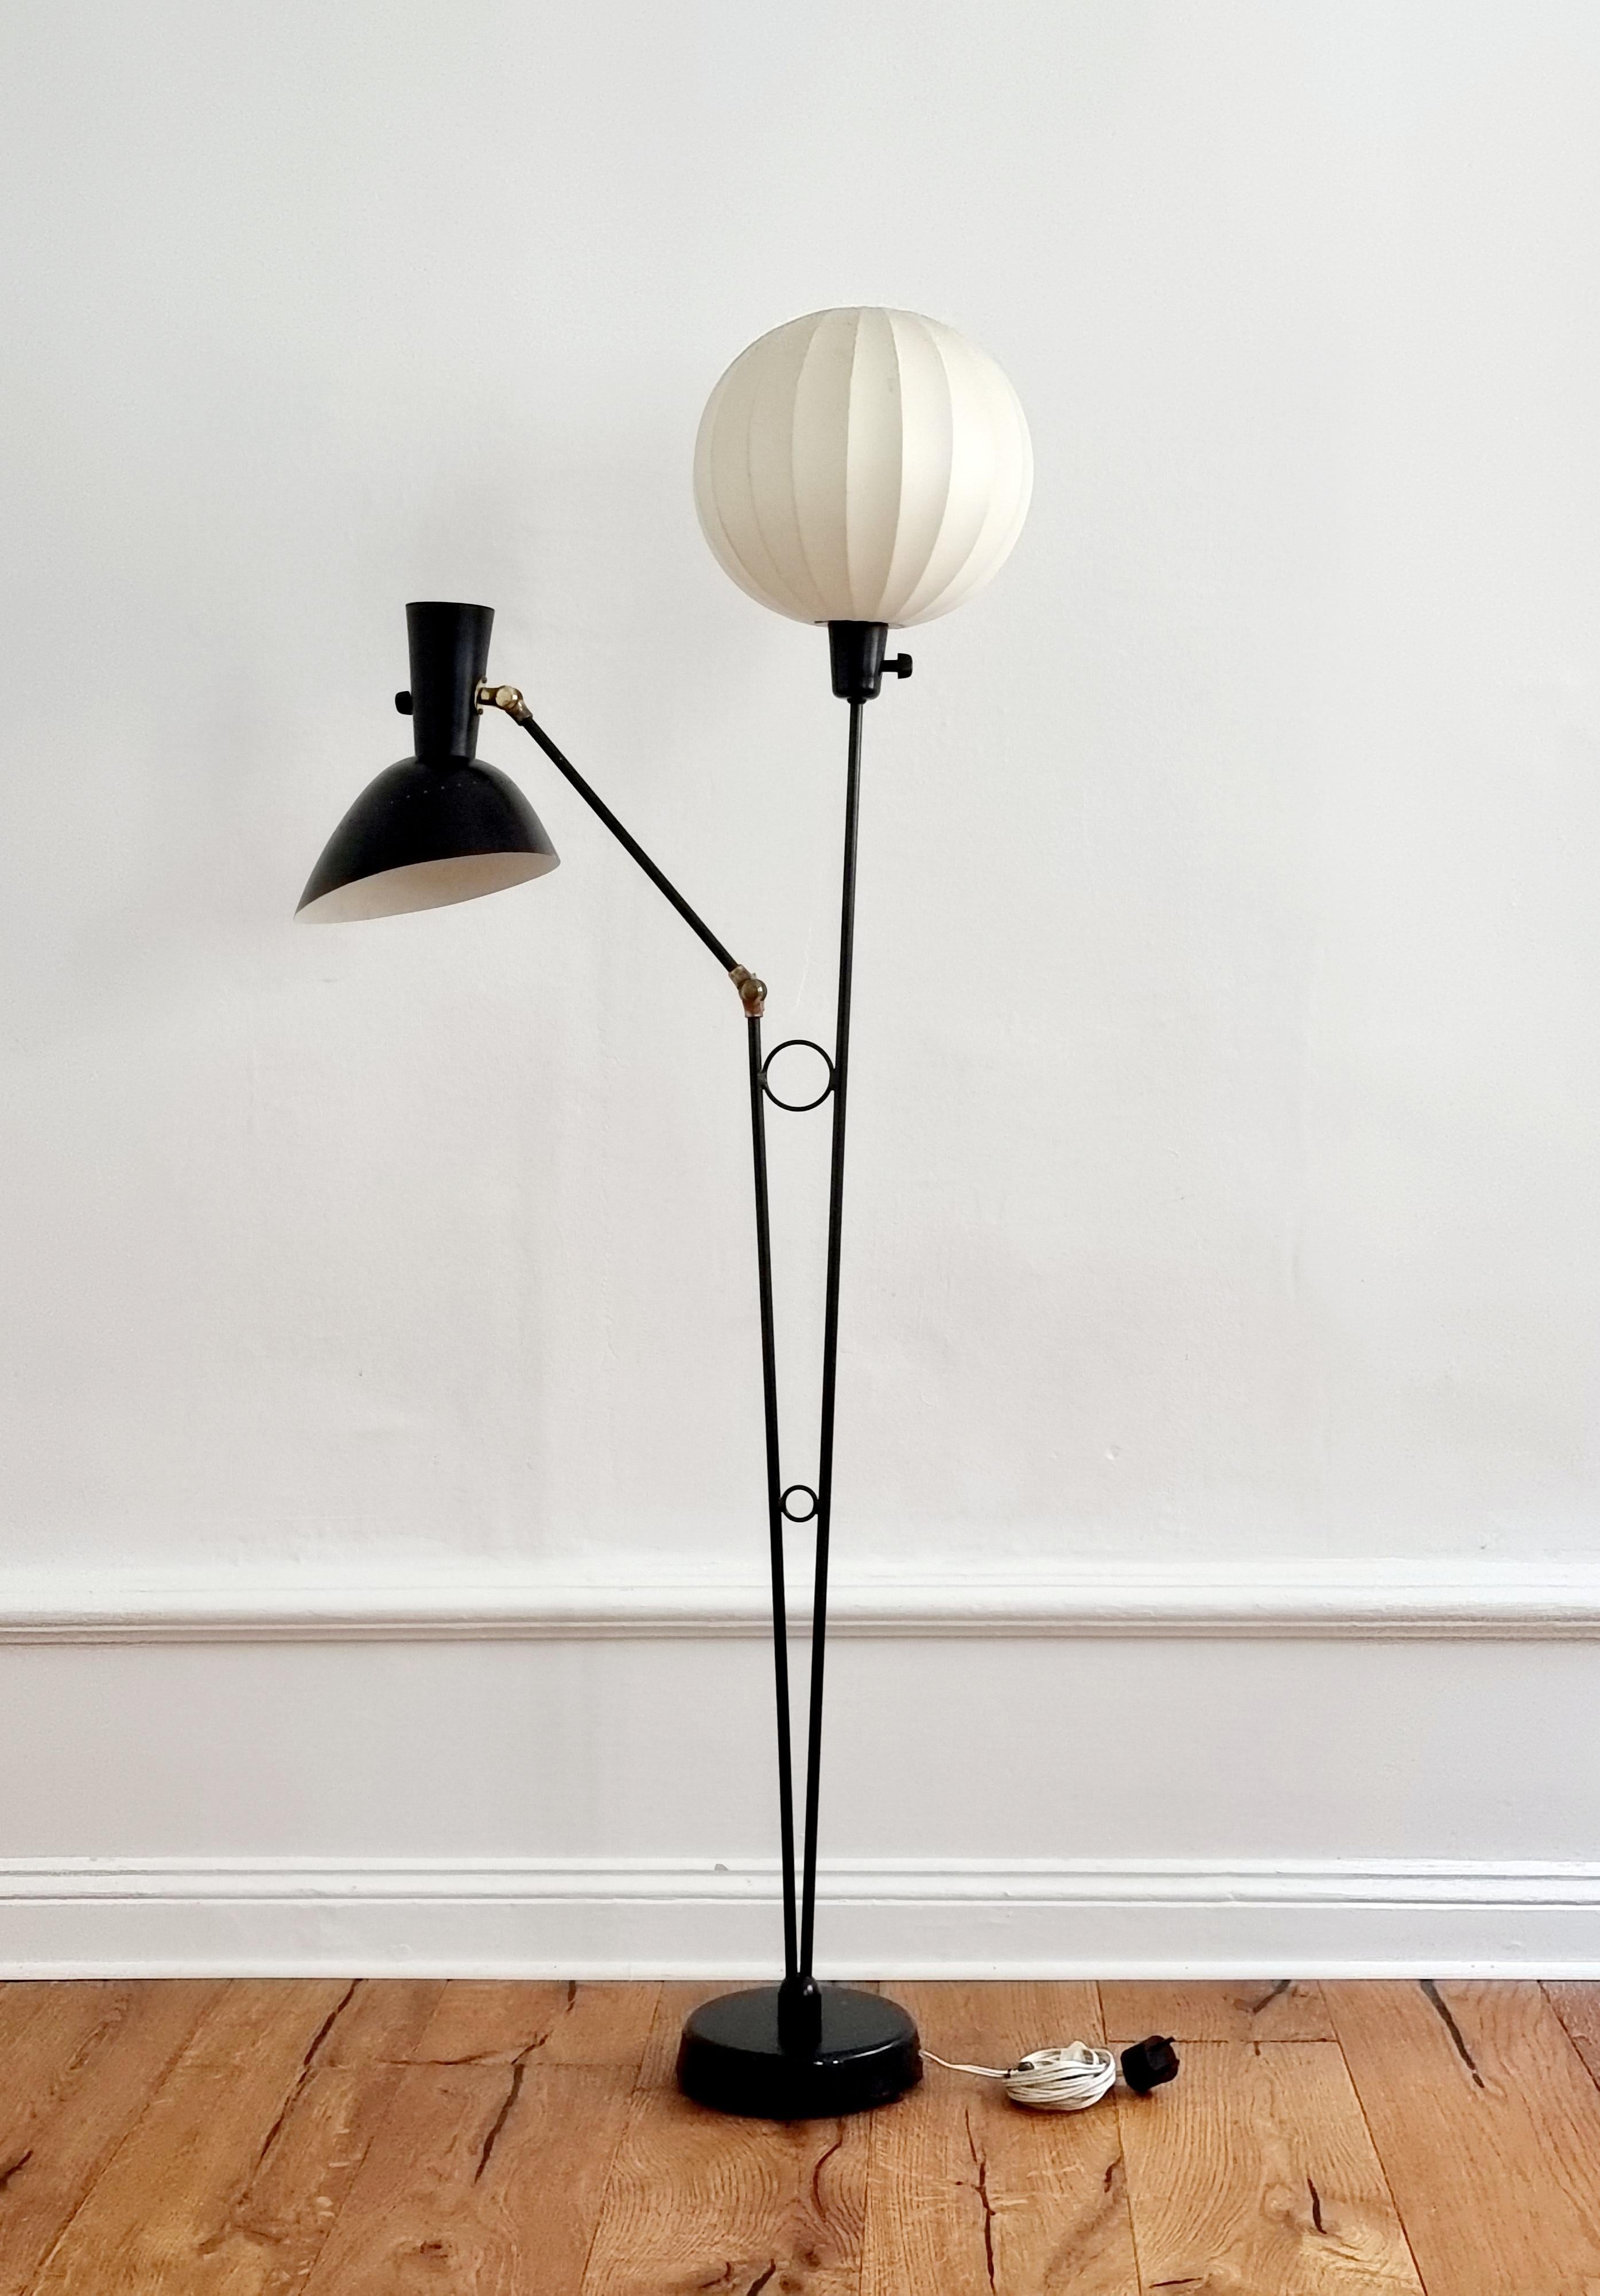 Unique floor lamp by Hans Bergström for Ateljé Lyktan. Sweden, mid-1900s. One arm is adjustable, one shade with original resin stretch.

In good condition, smaller signs of wear and color loss. Resin in good condition, no damages. The black laquer